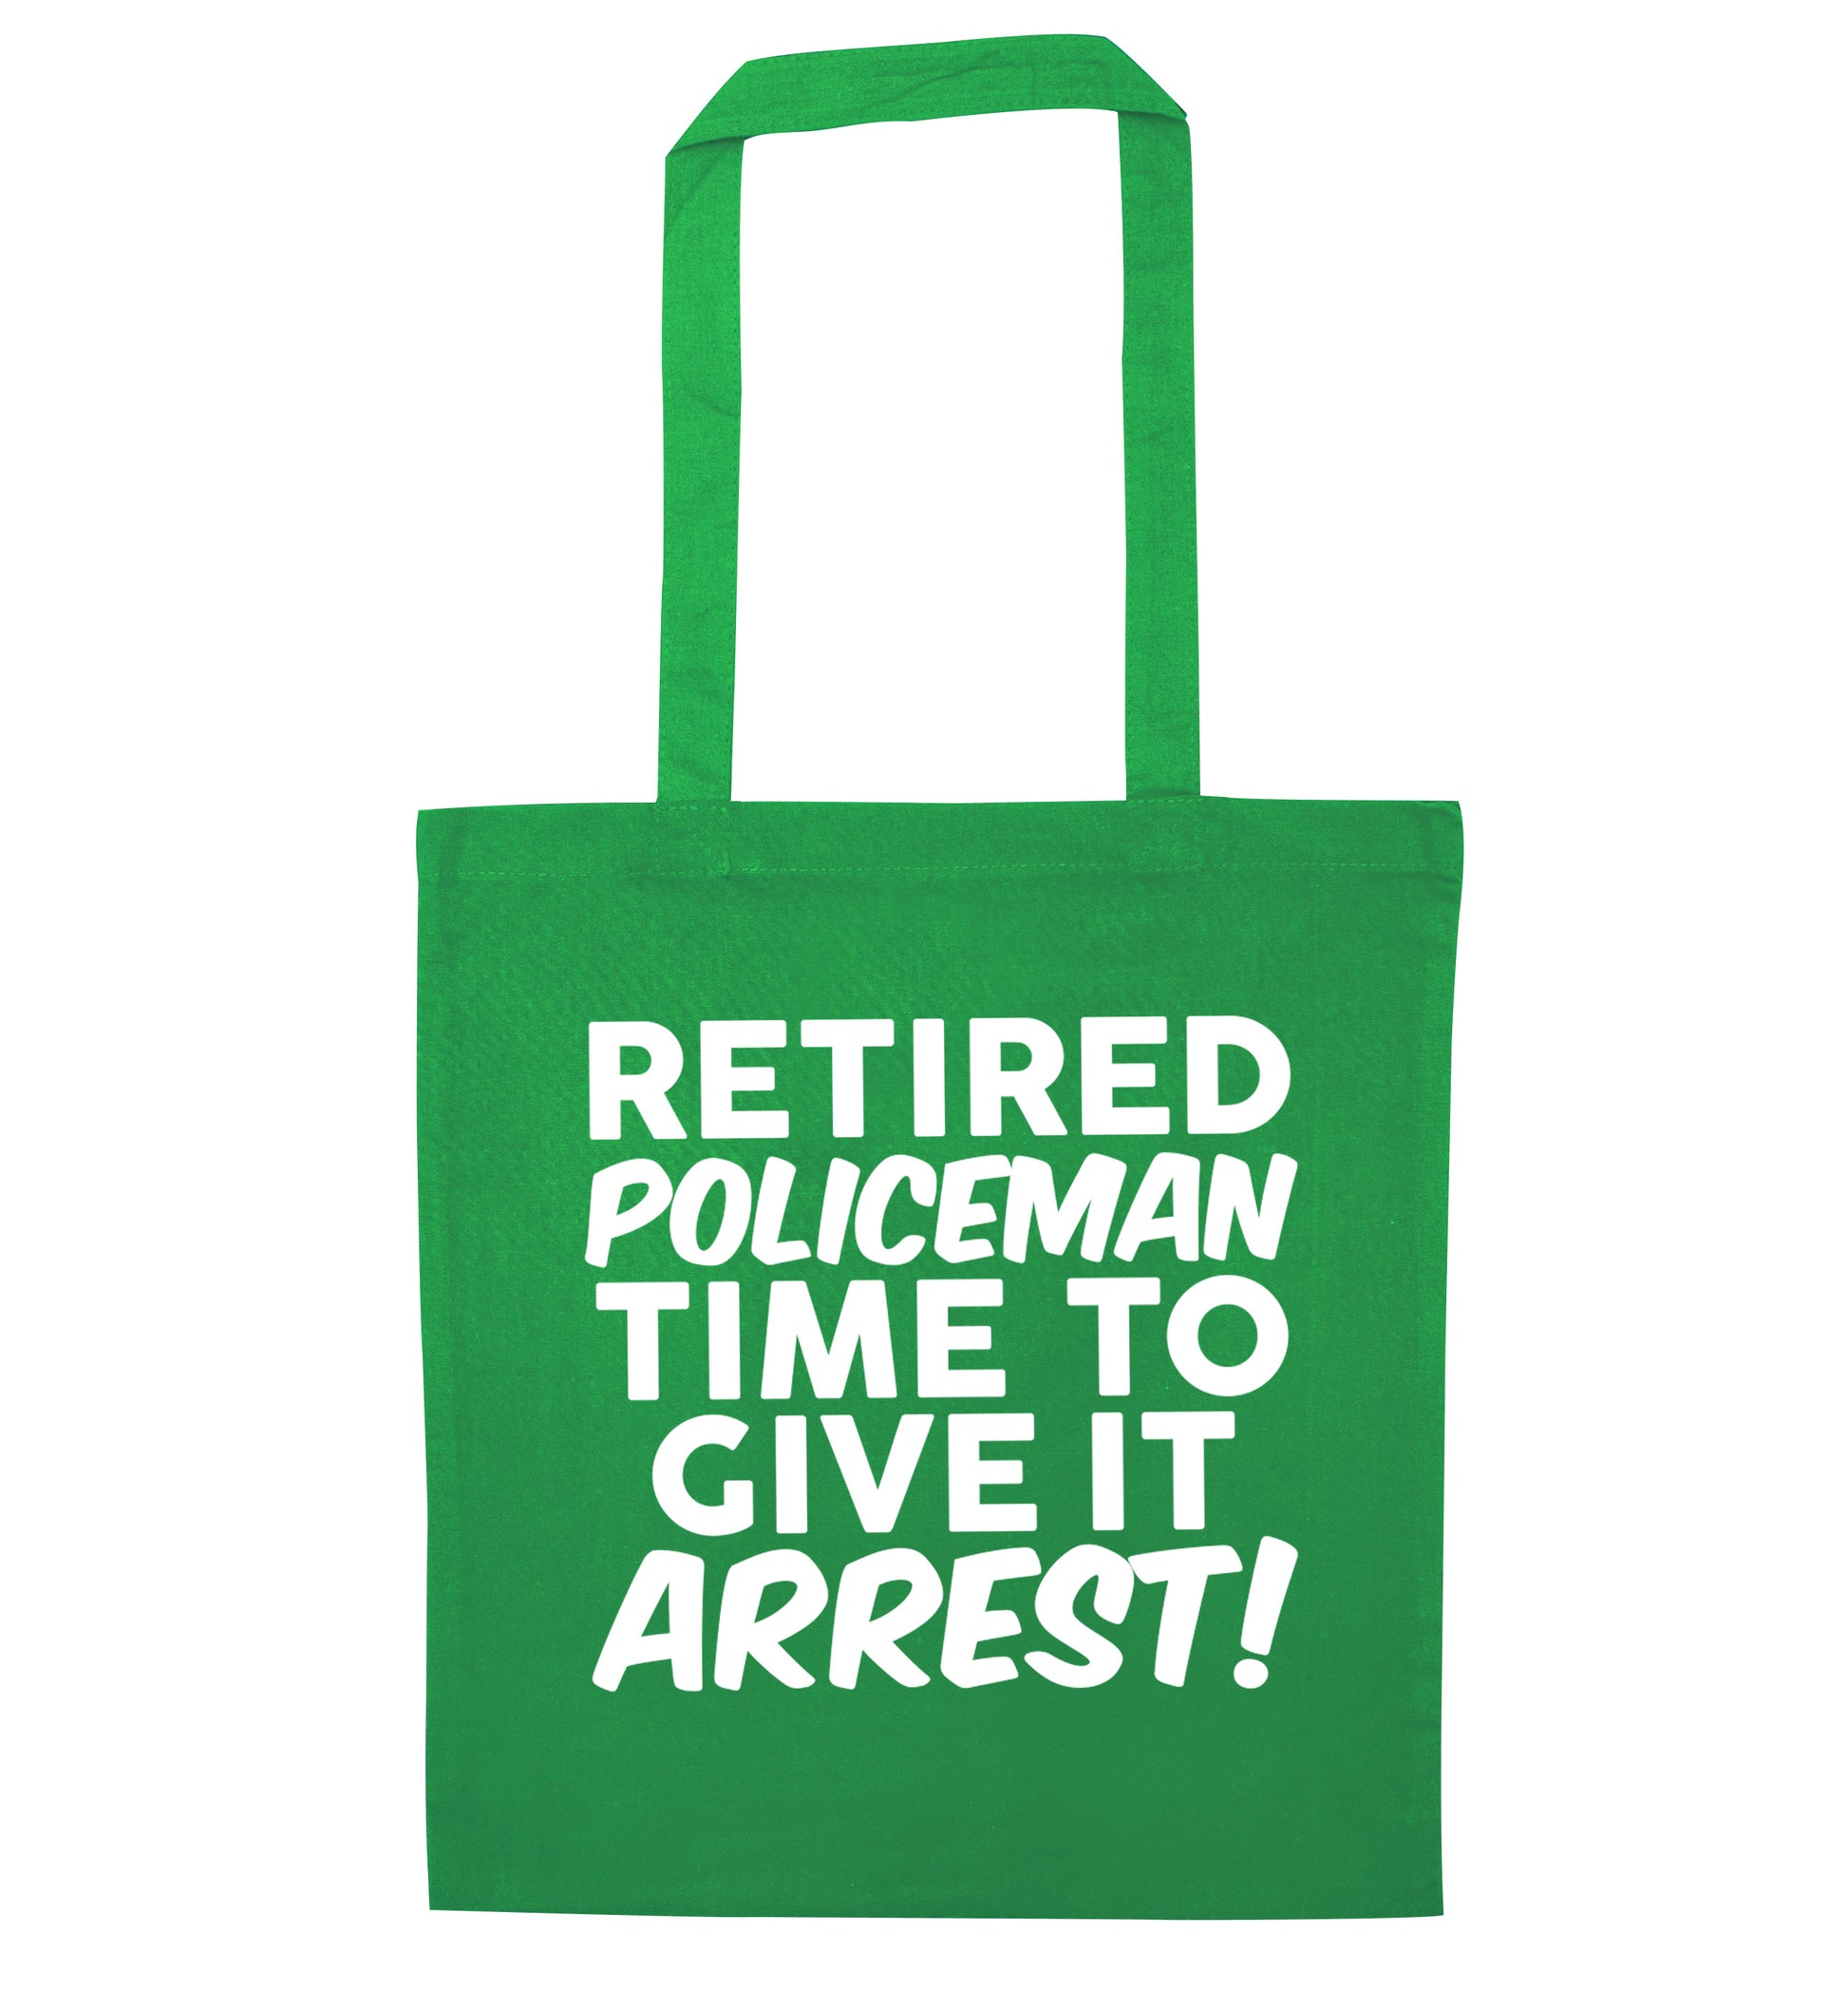 Retired policeman give it arresst! green tote bag